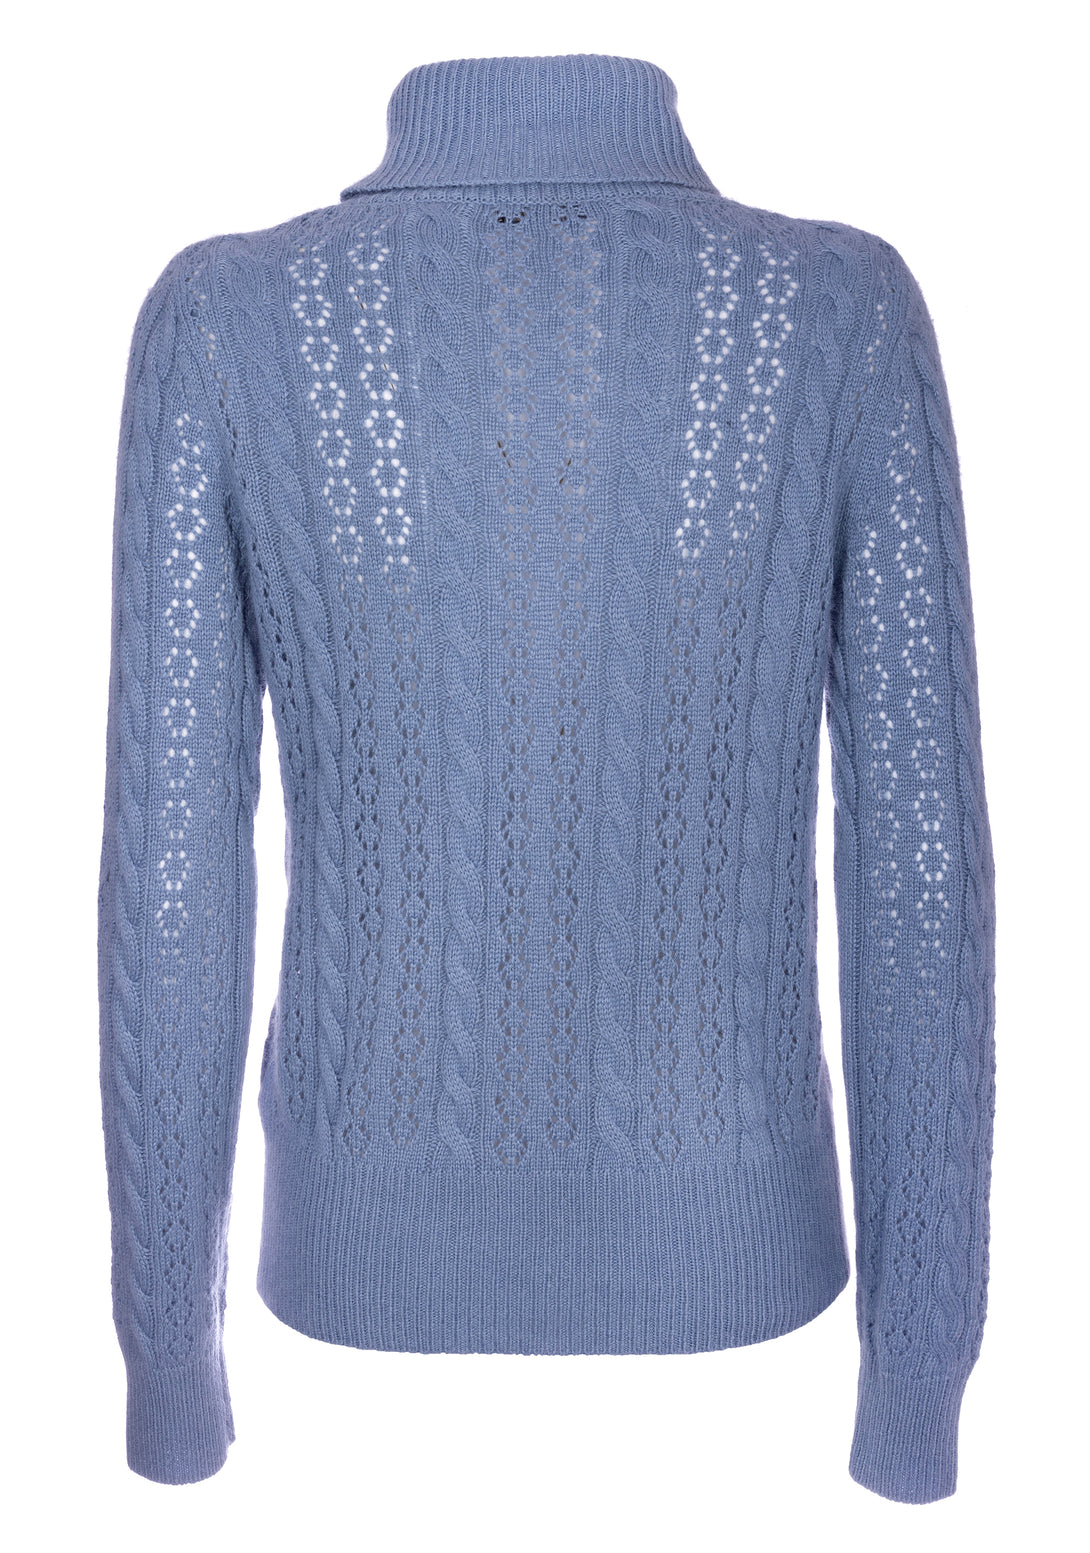 Knitwear regular fit with plaits made in mohair and wool